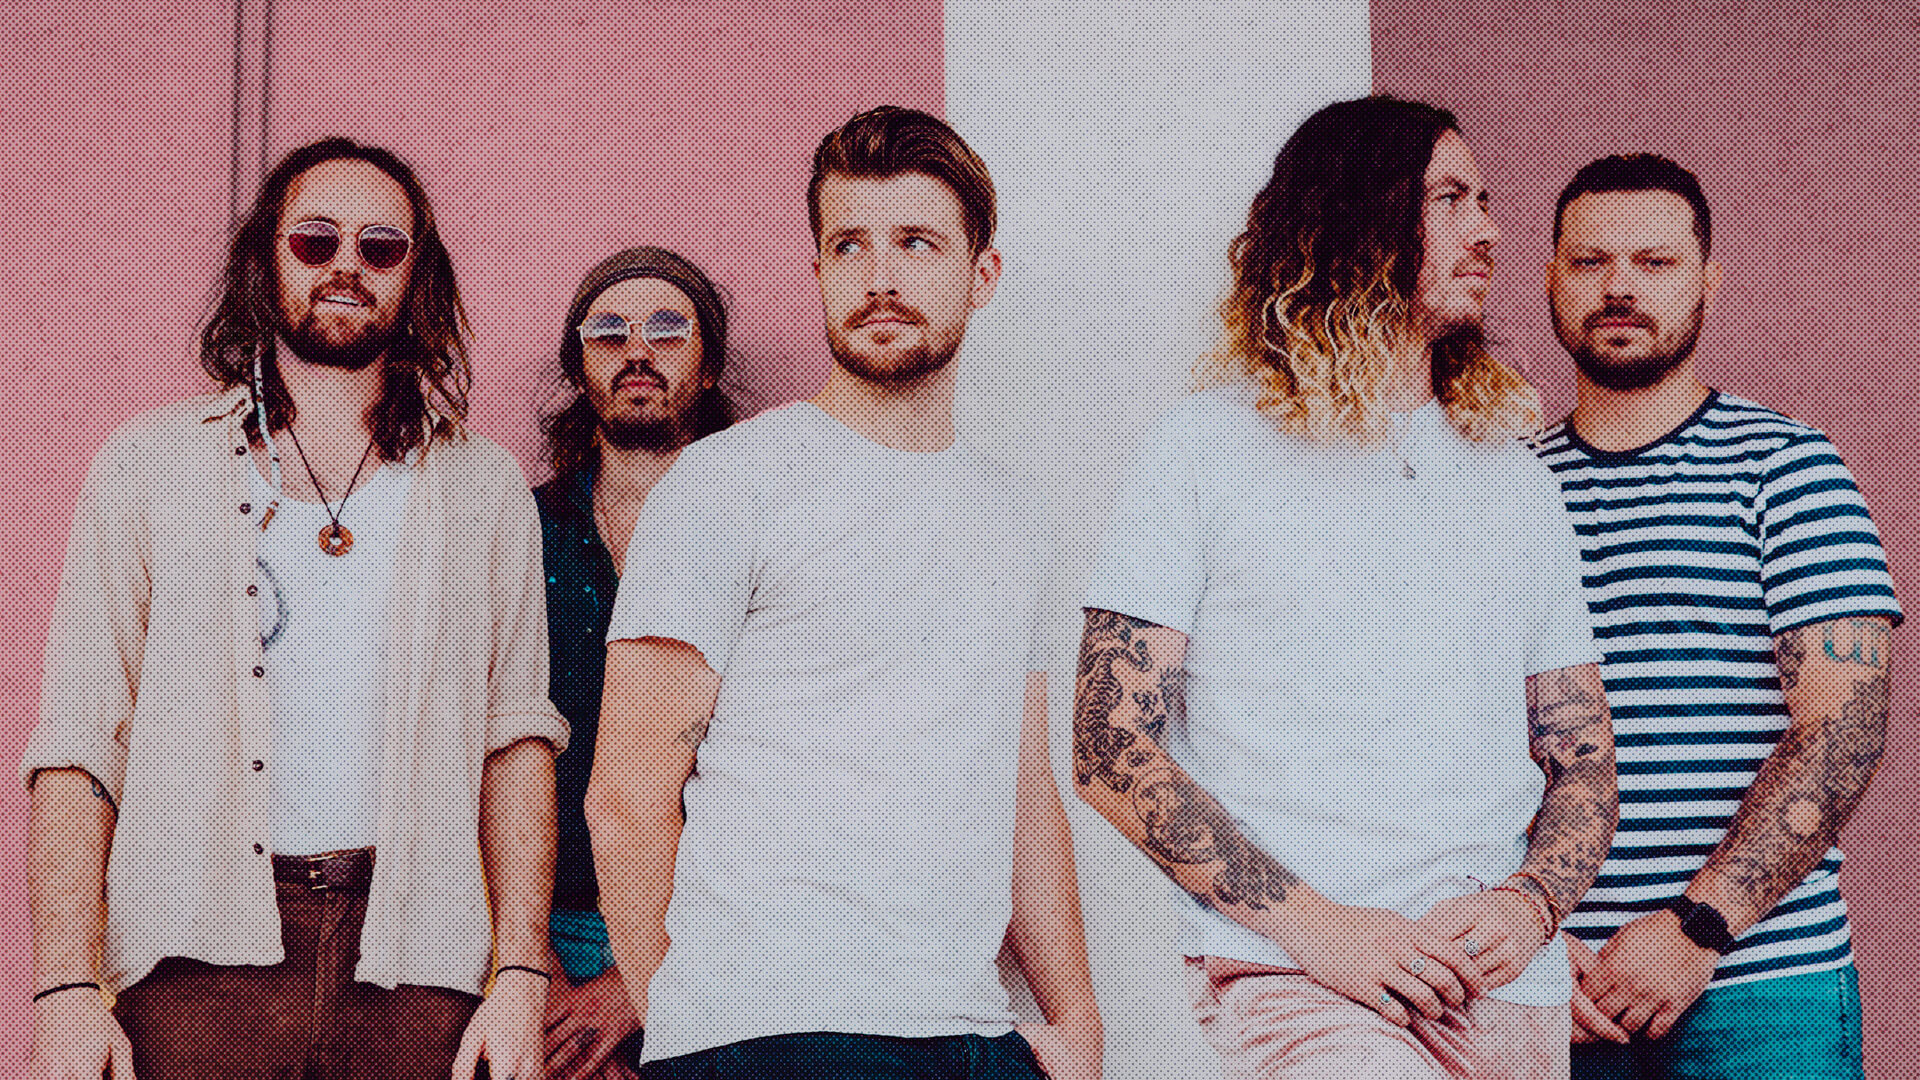 HANDS LIKE HOUSES RELEASE NEW SINGLE “THE WATER”; ANNOUNCE SELF-TITLED EP